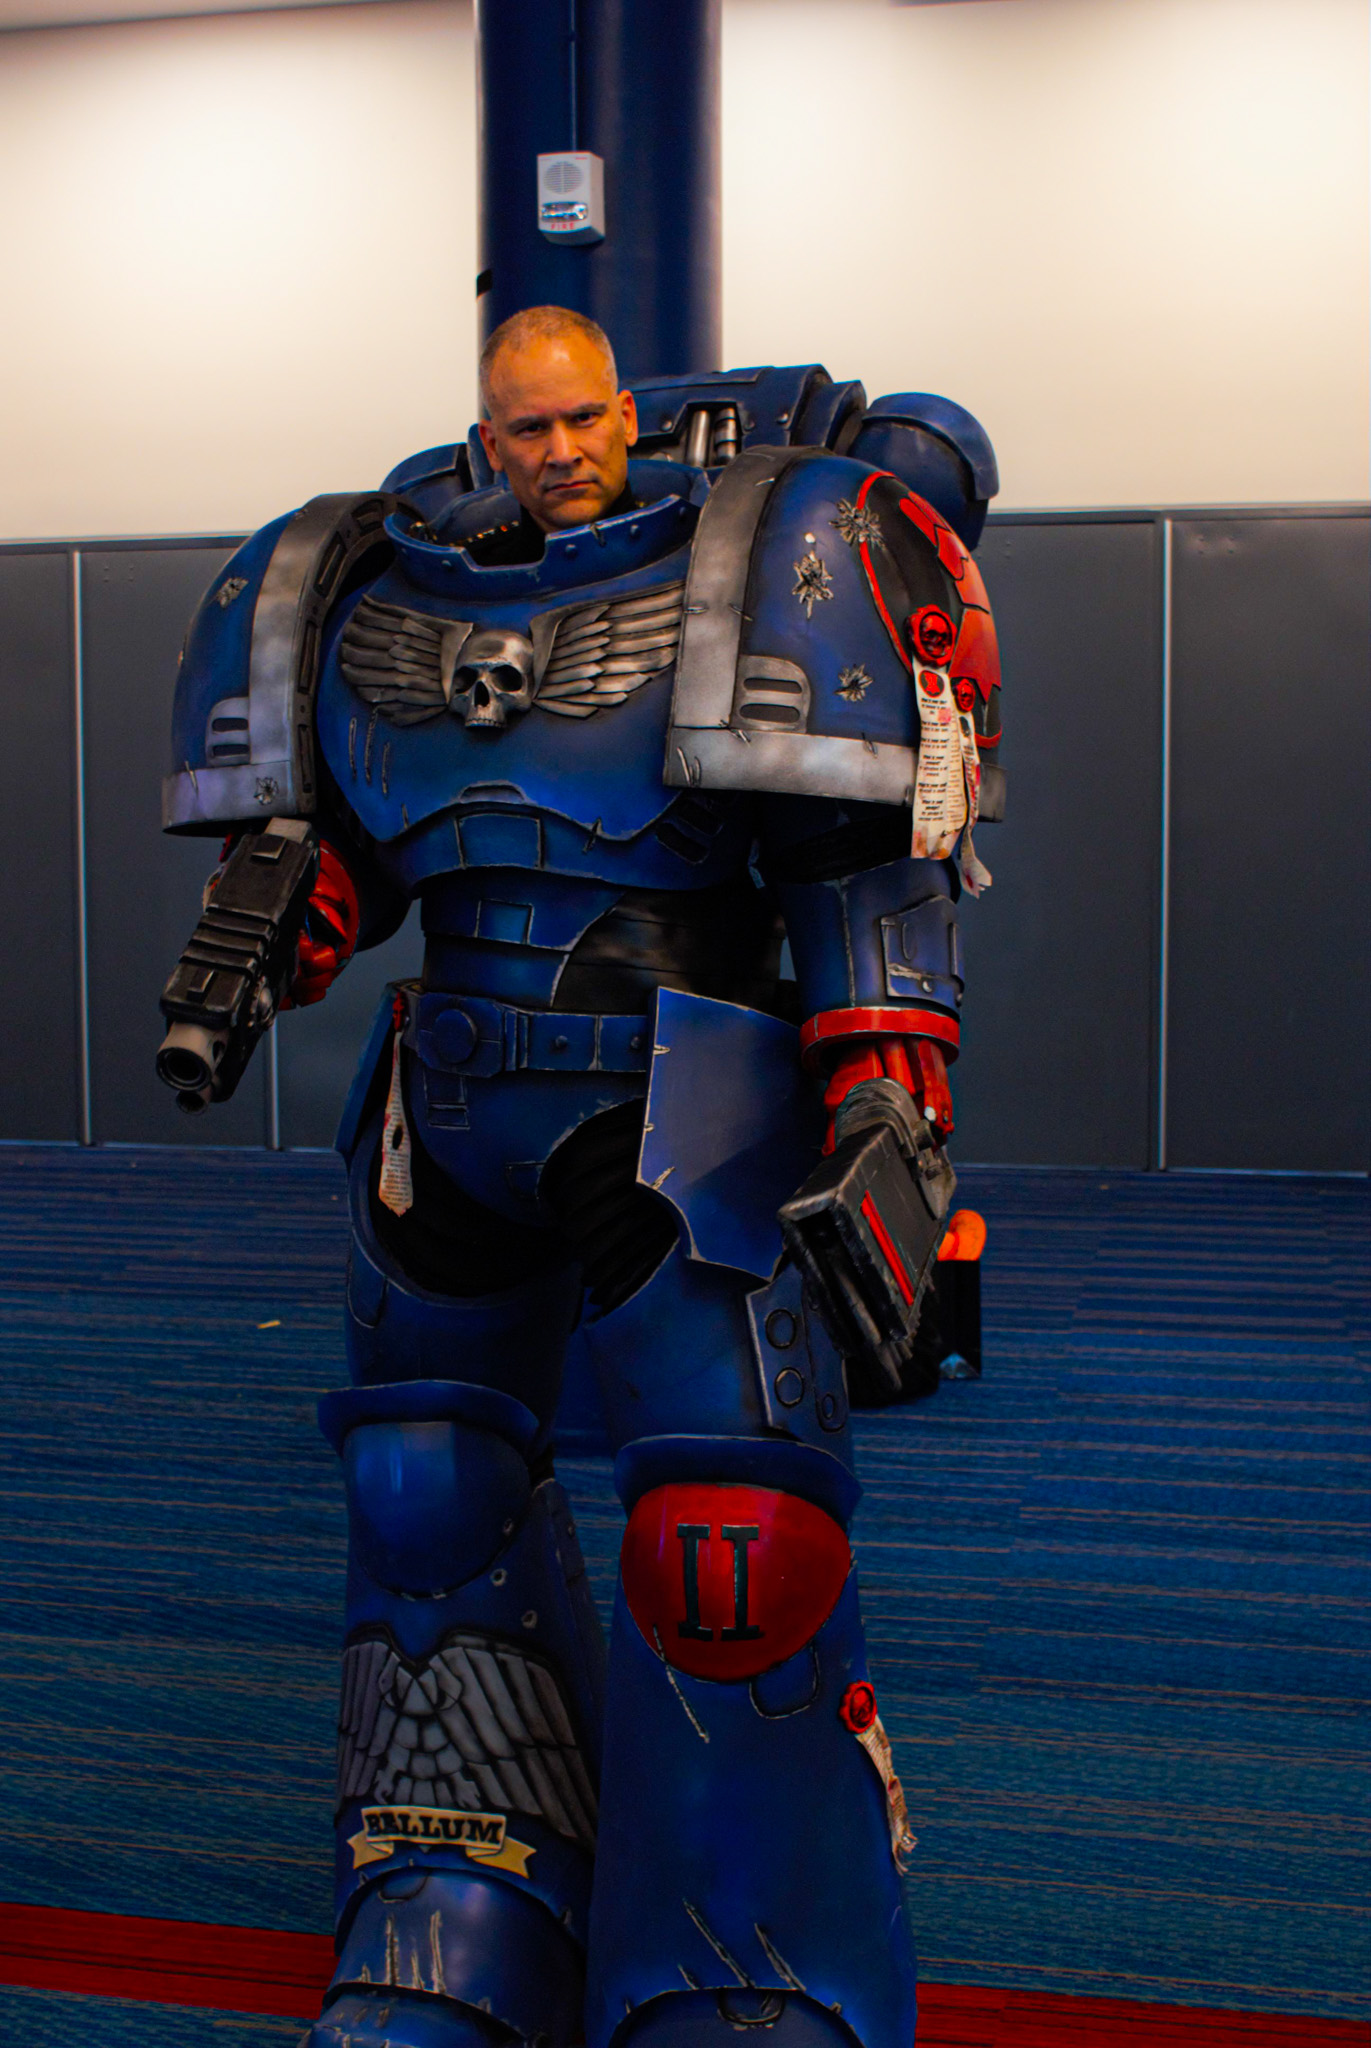 Will Ellis is cosplaying as a Crimson Fist space marine from the sci-fi series Warhammer 40k. This was his third year here at Comicpalooza, the cosplay took Will two months to create, and he had to work on it after work seven days a week. Photo By reporter Adan Martinez.